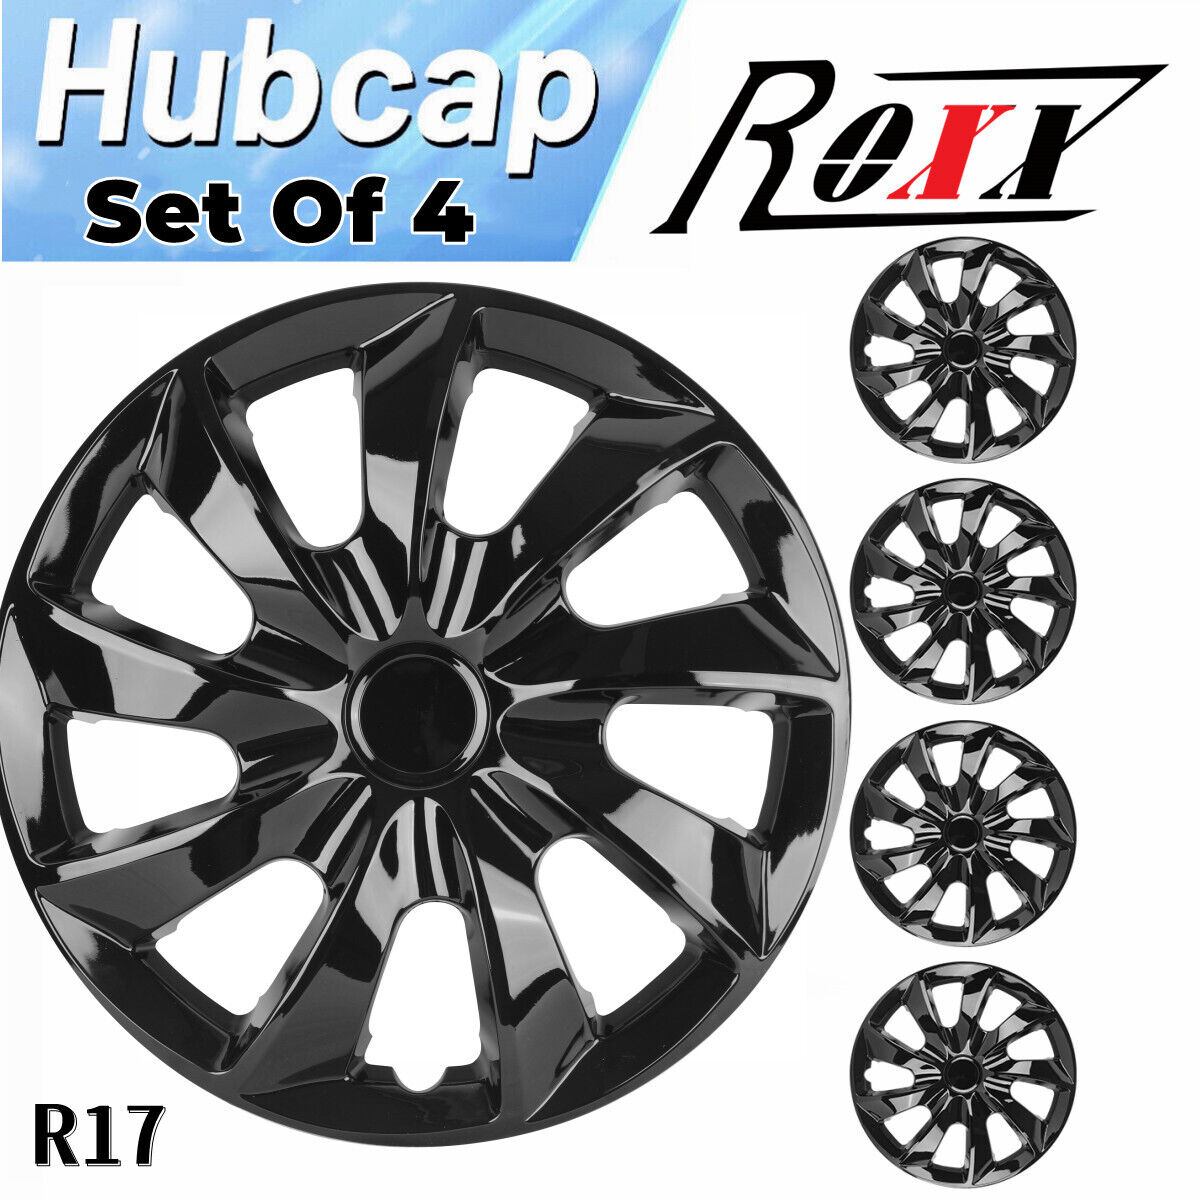 (4 Pack)17 Inch Universal Wheel Rim Cover Hubcaps Snap On Car Truck Fit R17 Tire